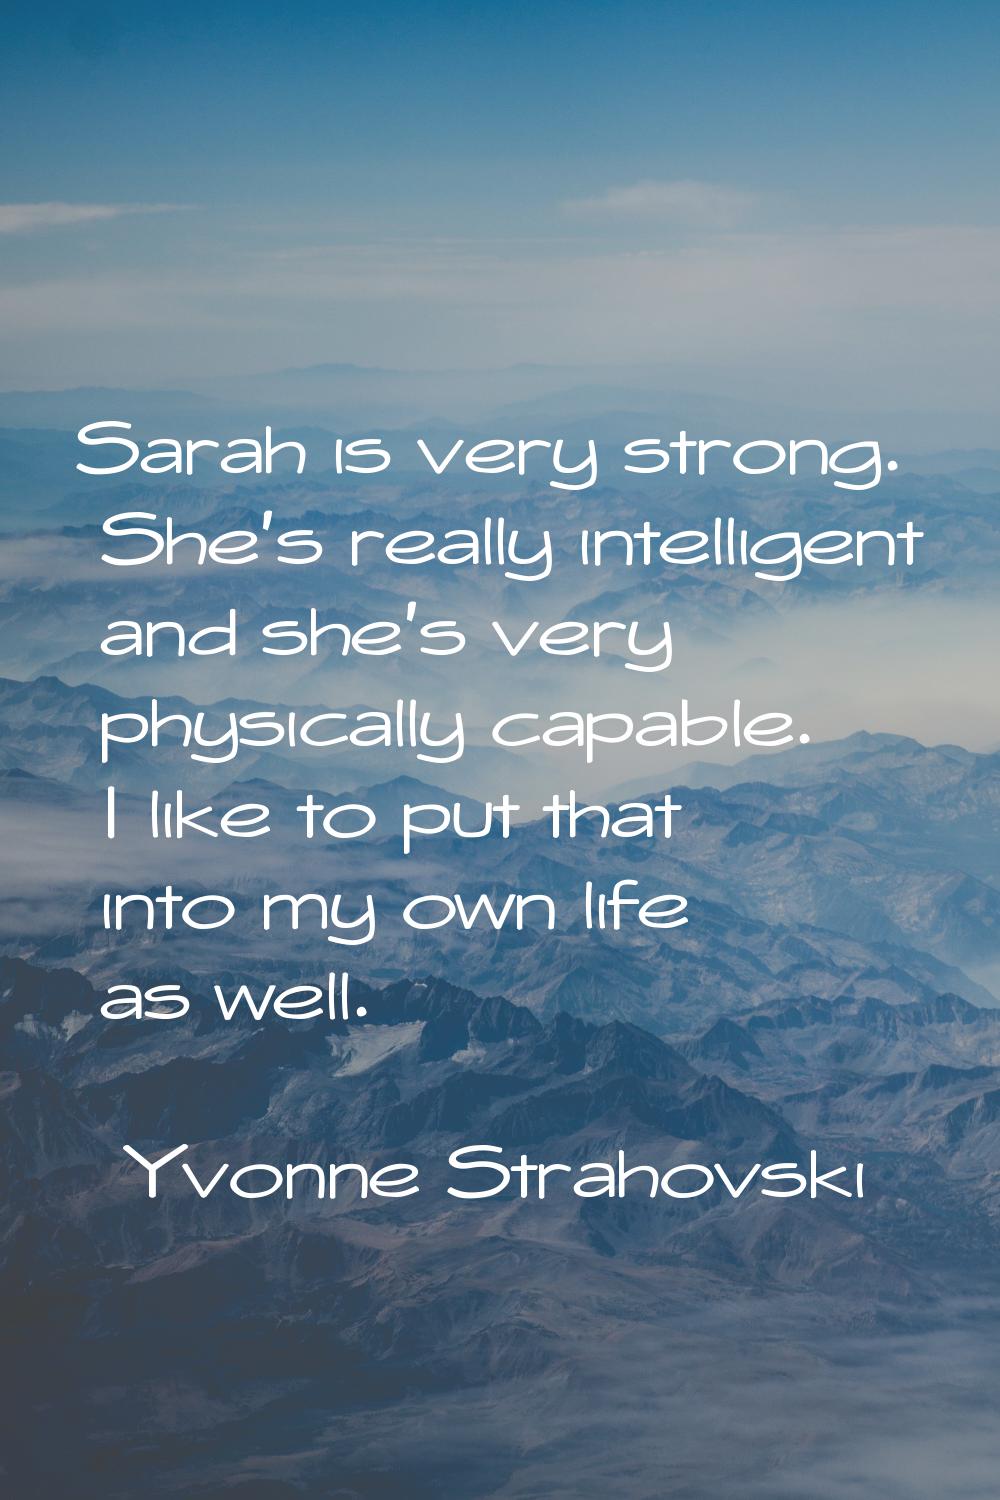 Sarah is very strong. She's really intelligent and she's very physically capable. I like to put tha